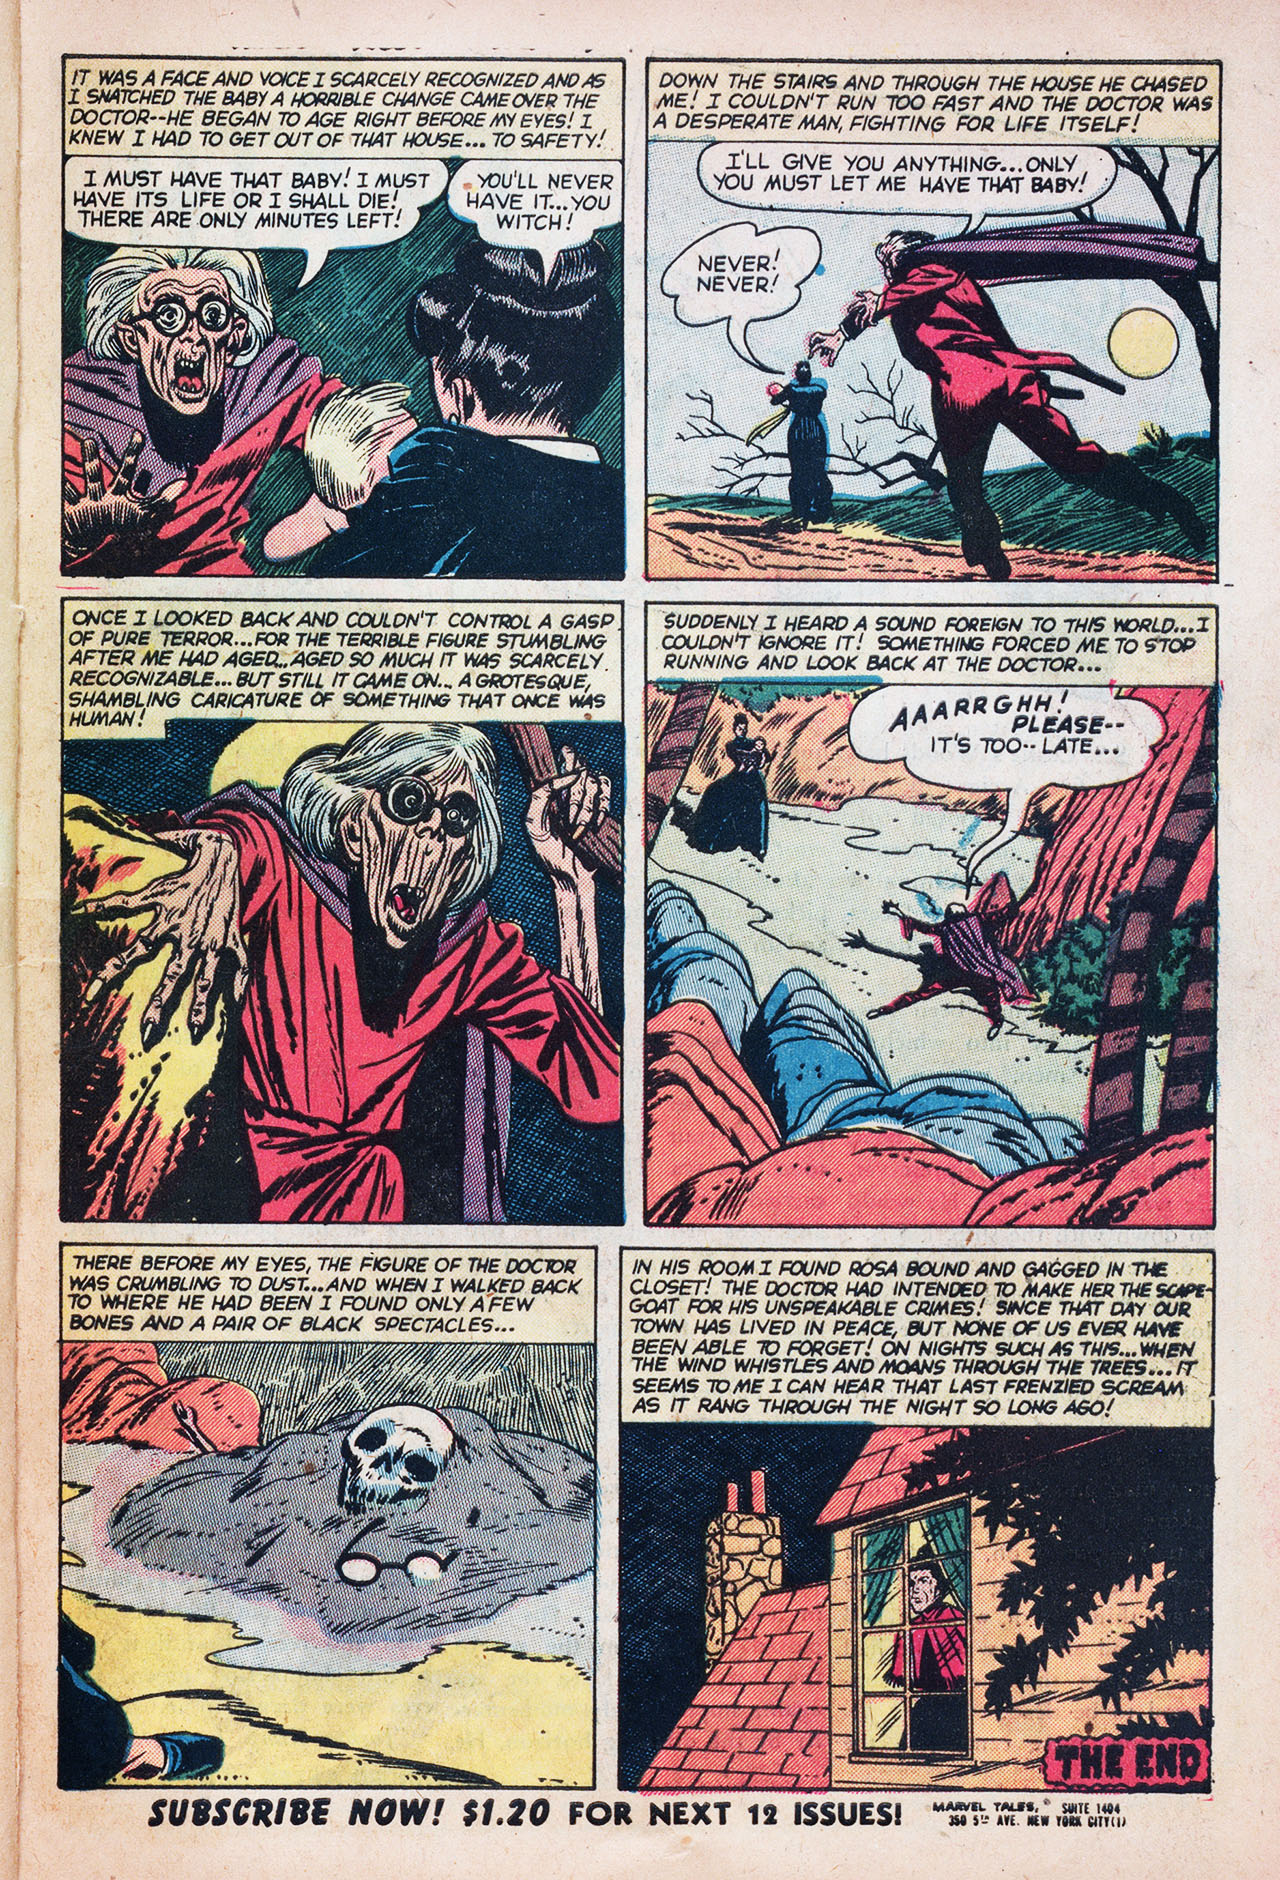 Marvel Tales (1949) 102 Page 8